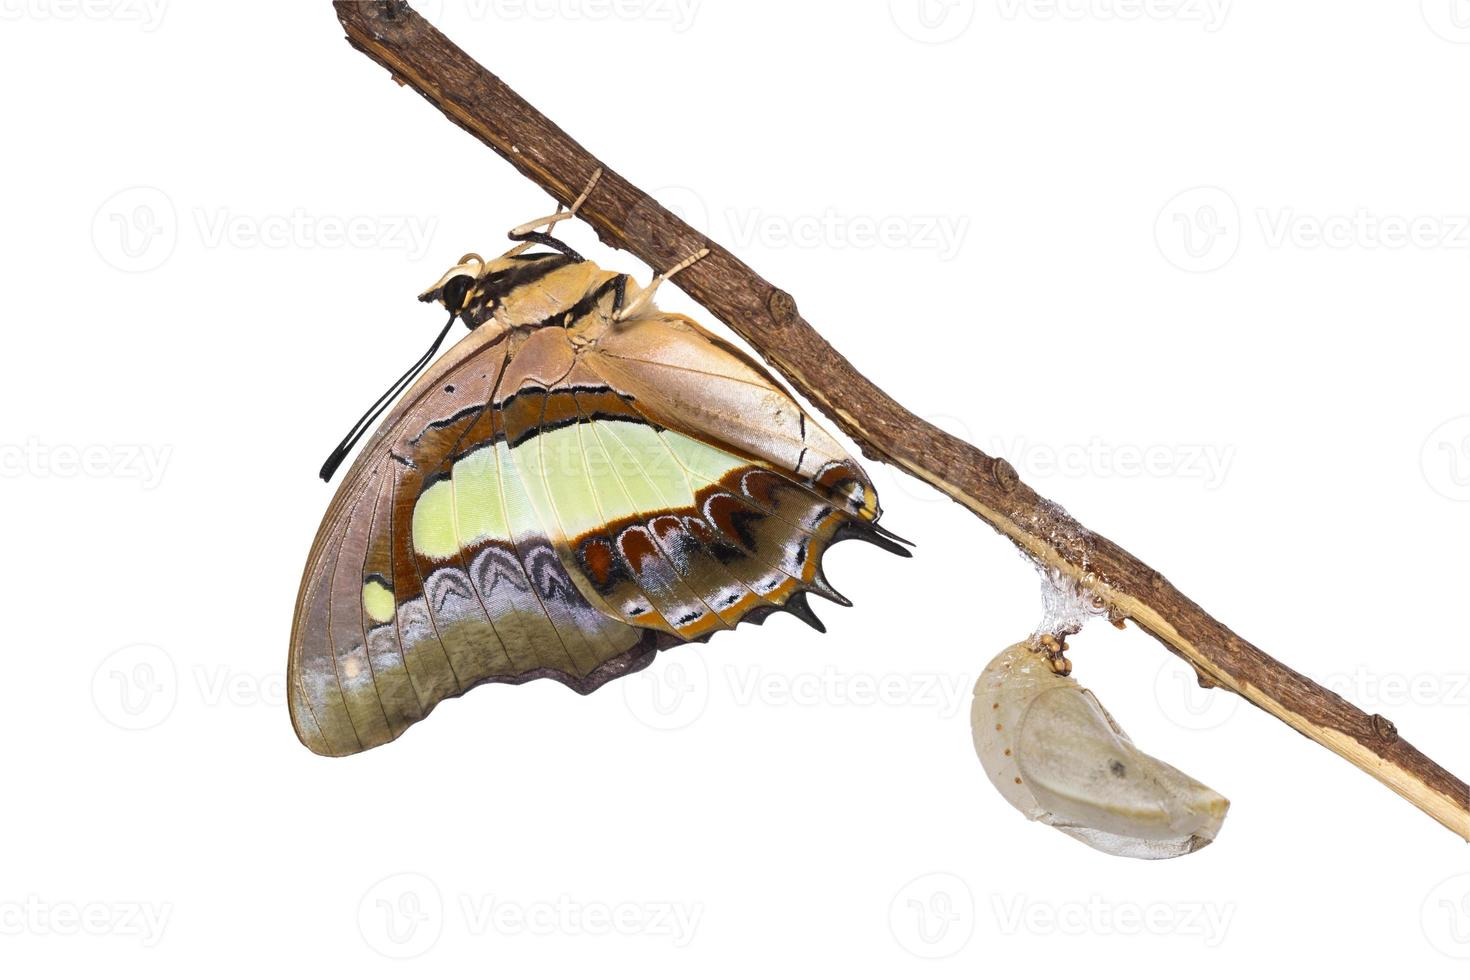 Nawab butterfly emerge from pupa photo